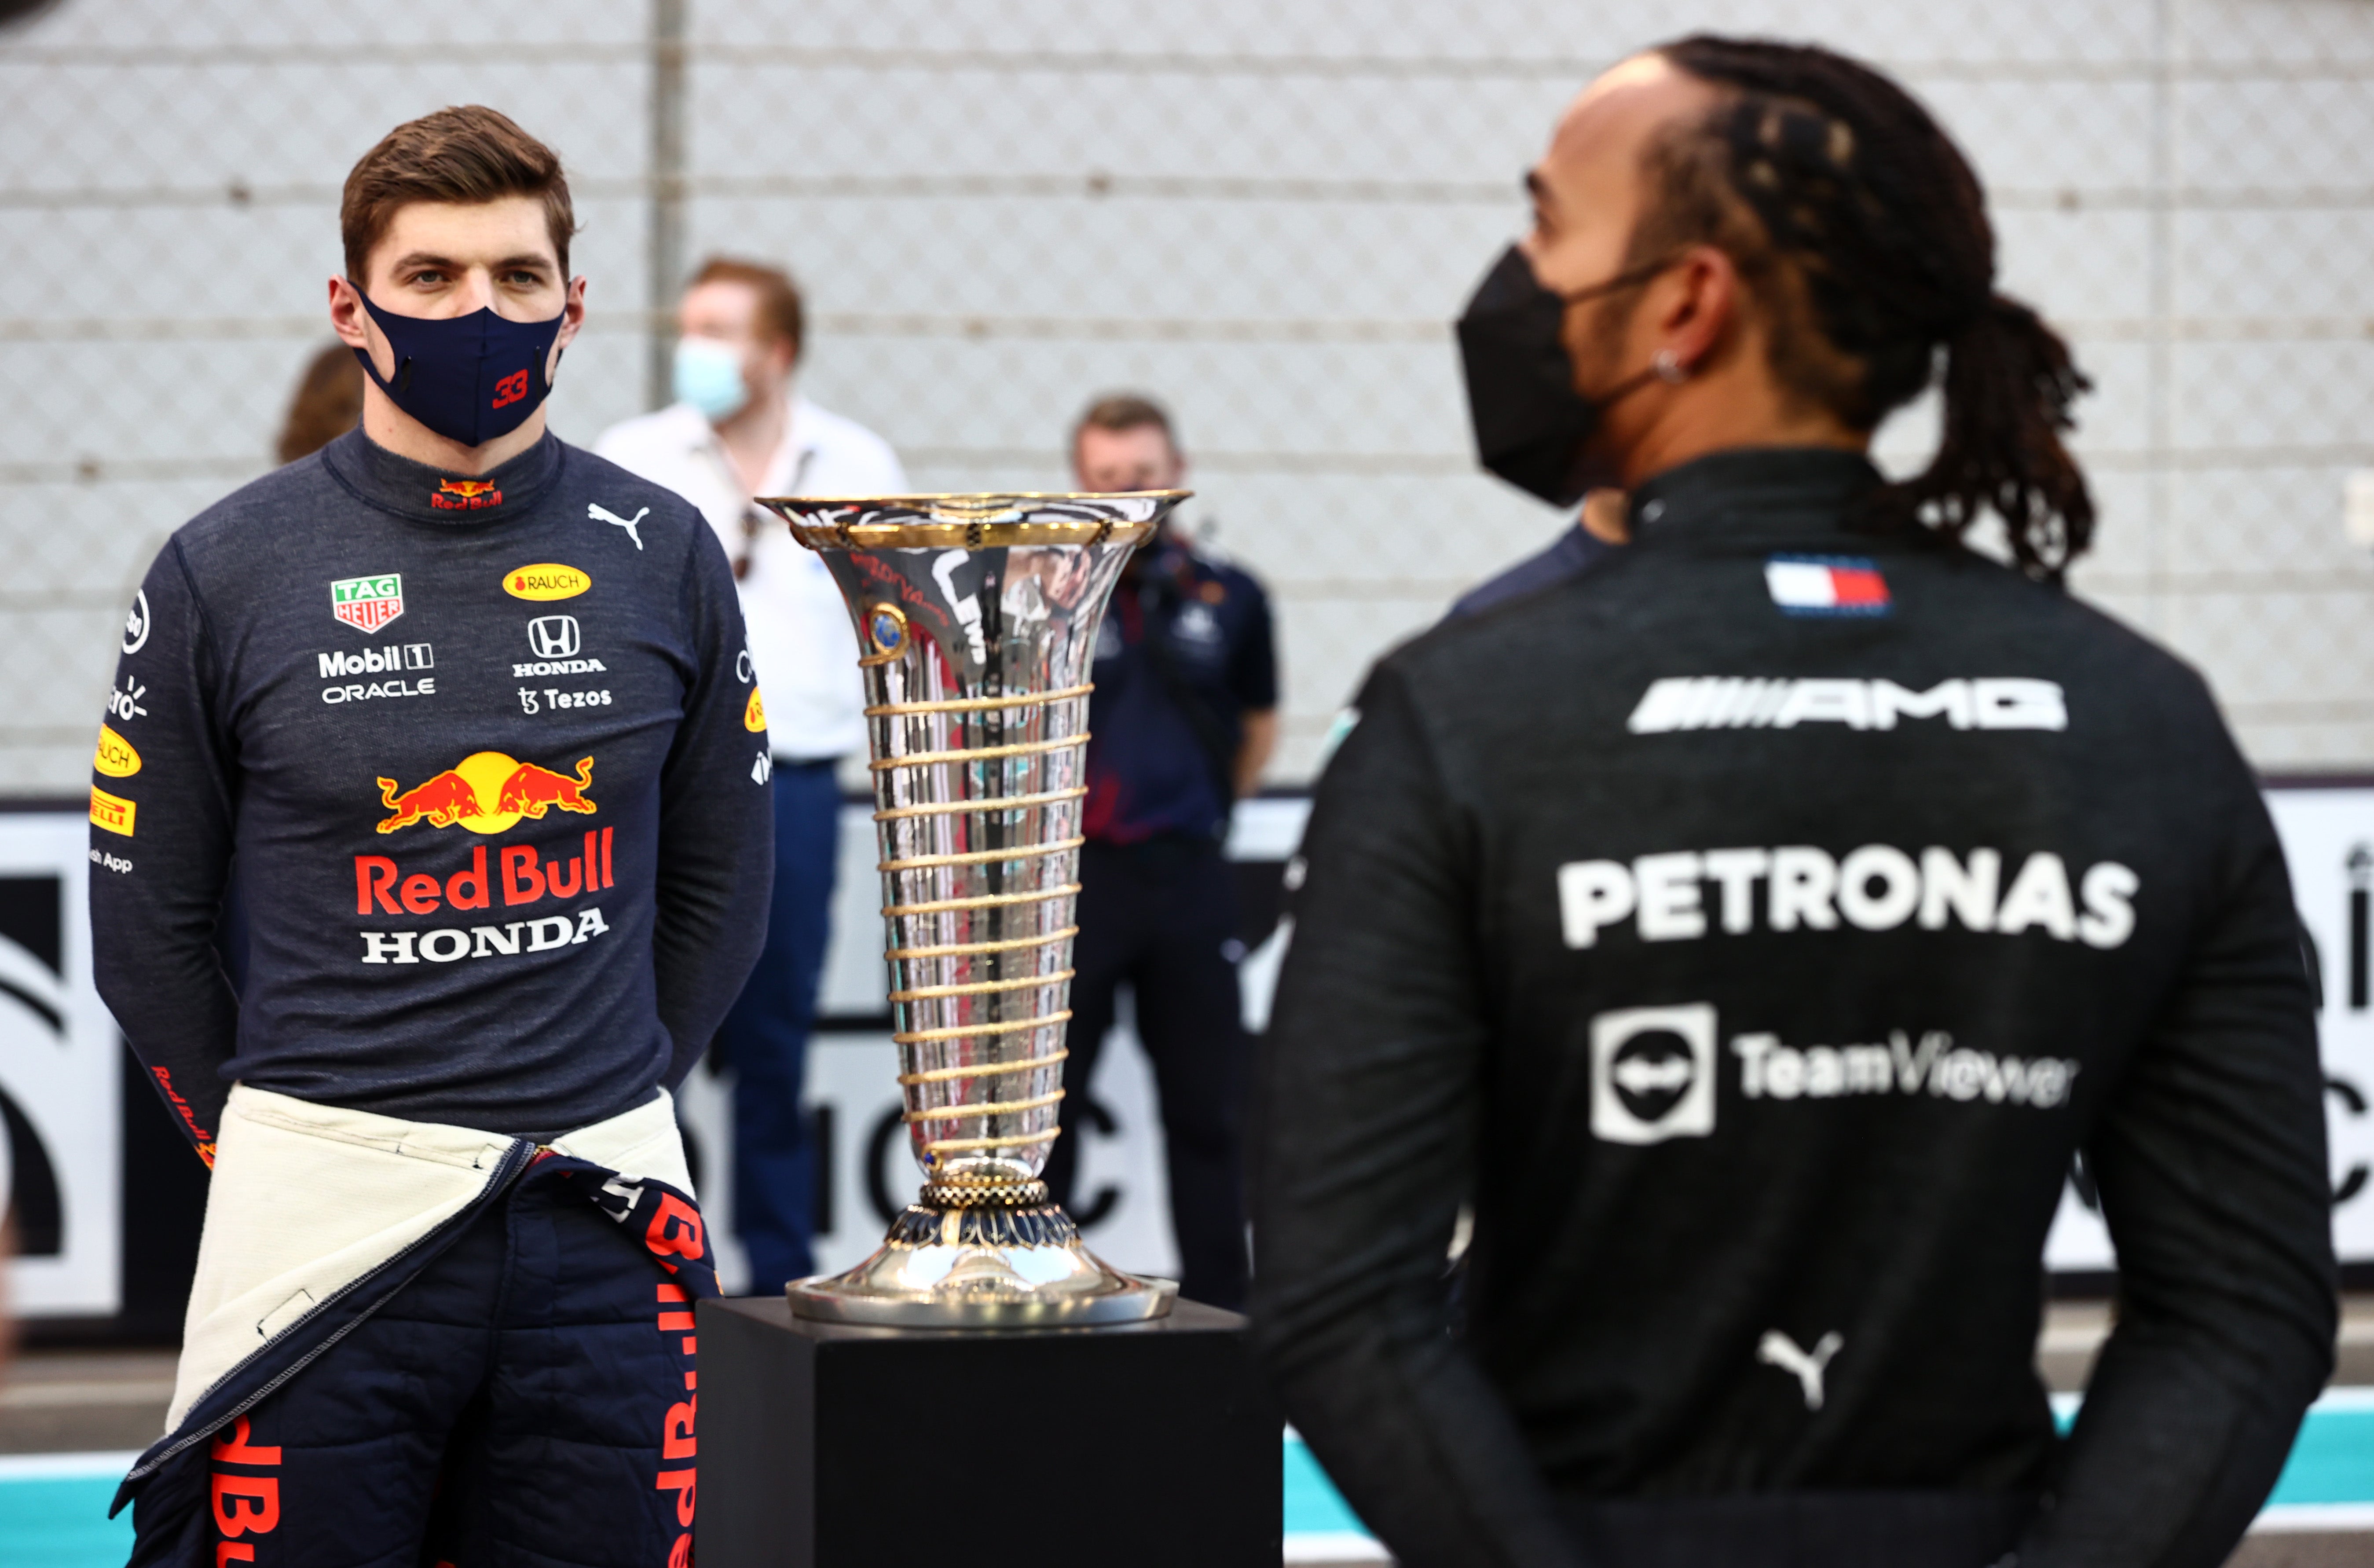 Max Verstappen stares at Lewis Hamilton prior to the winner-takes-all Abu Dhabi Grand Prix in 2021